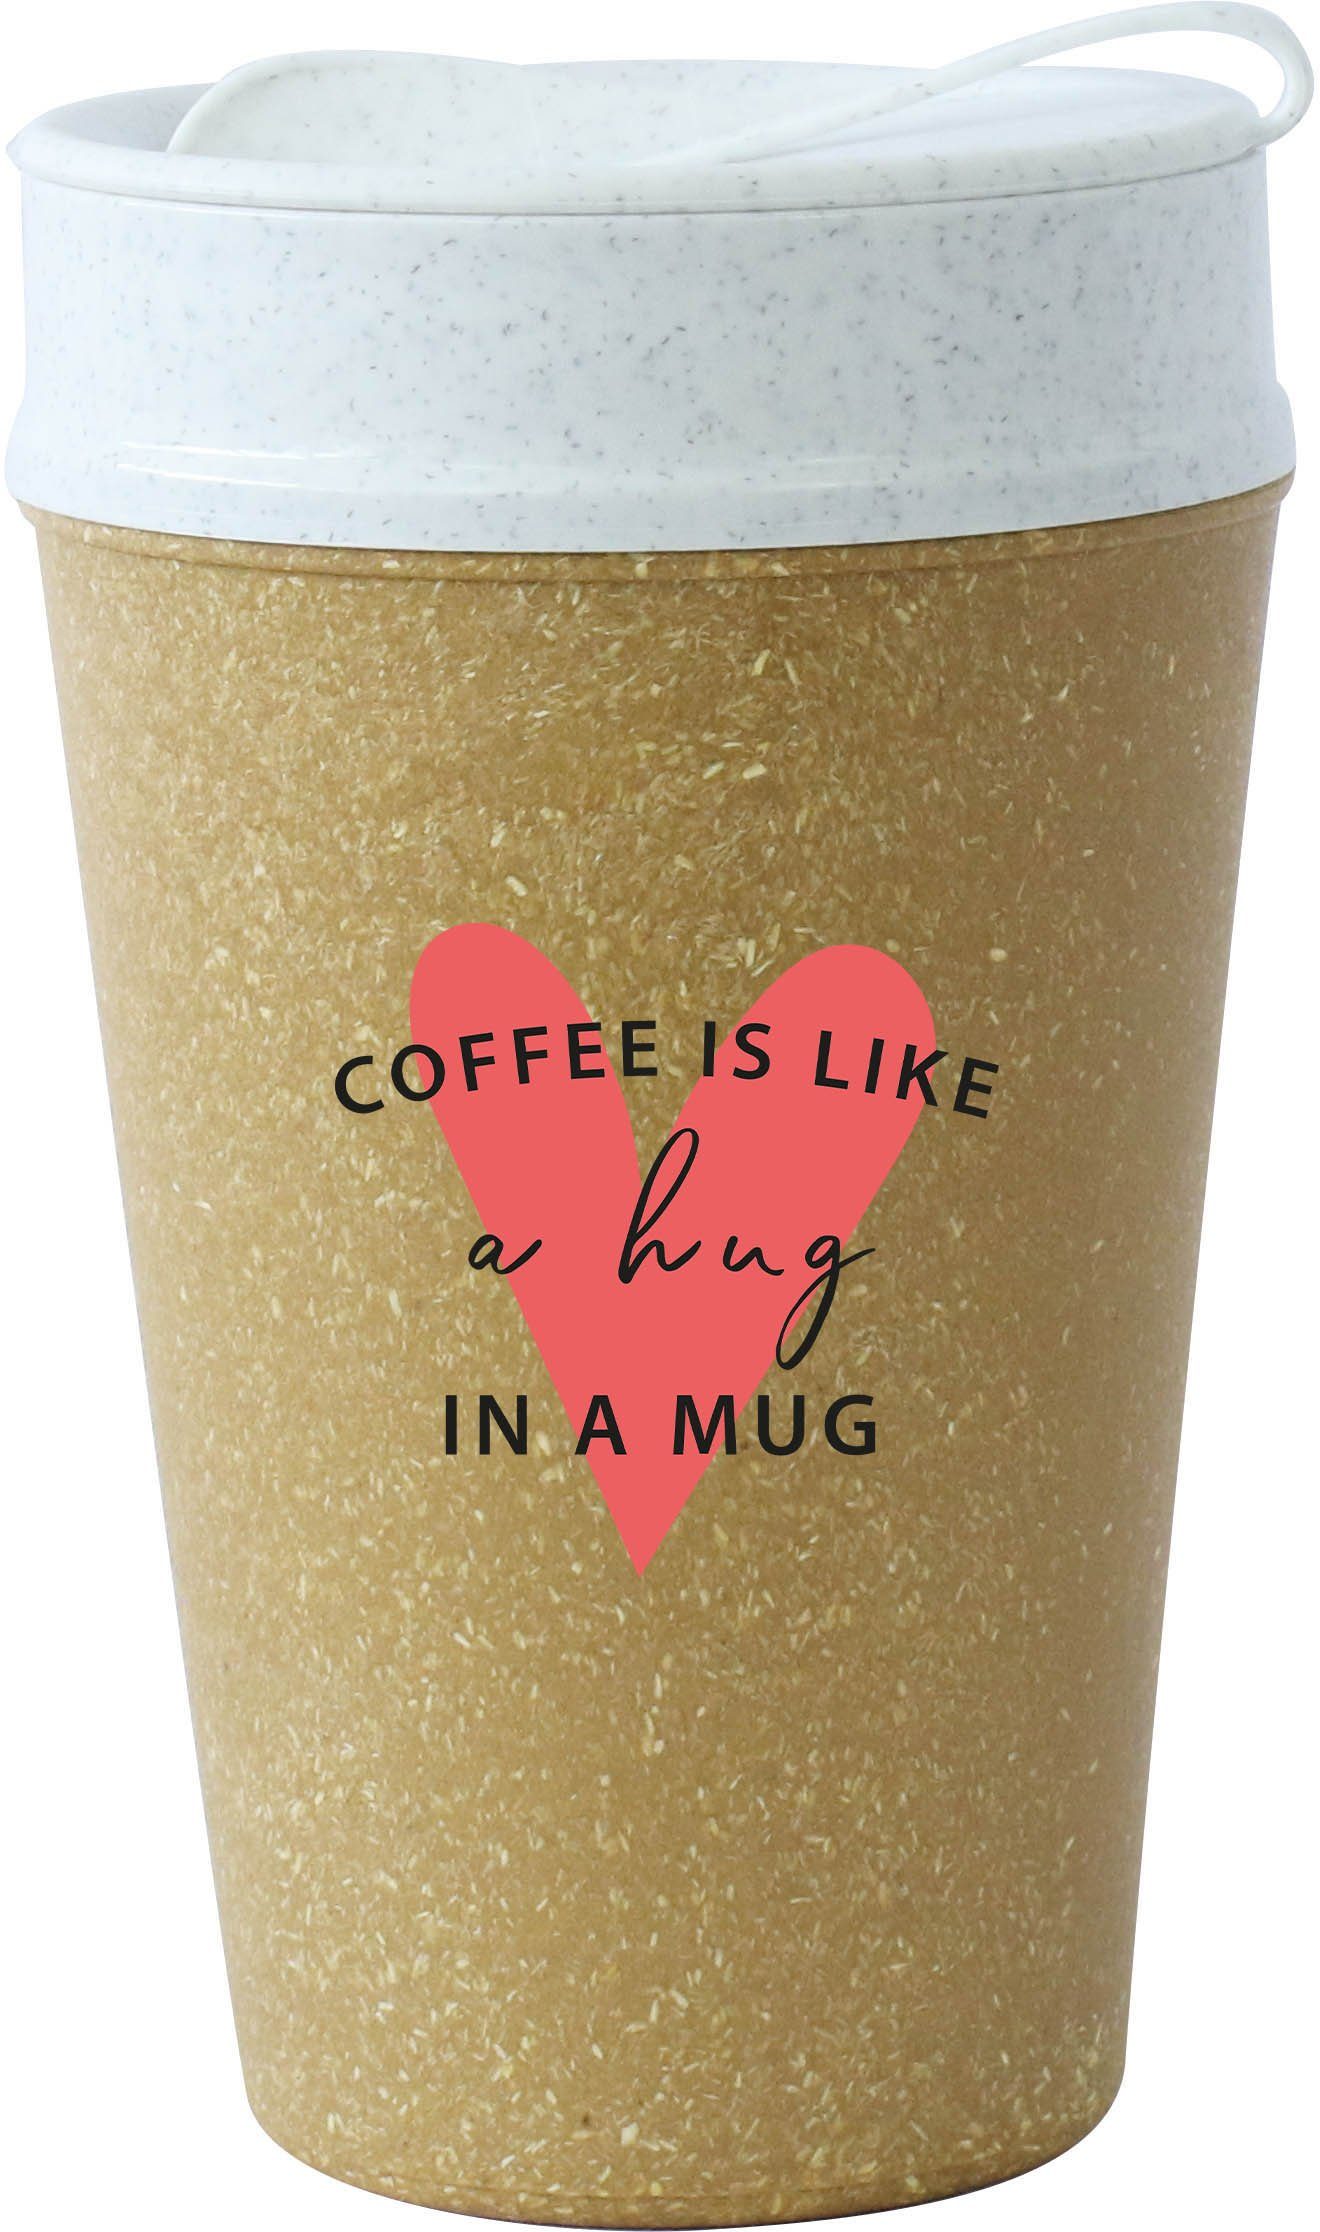 KOZIOL Coffee-to-go-Becher ISO TO GO LIKE A HUG IN A MUG, Holz, Kunststoff, 100% biobasiertes Material,doppelwandig,melaminfrei,recycelbar,400ml | Thermobecher